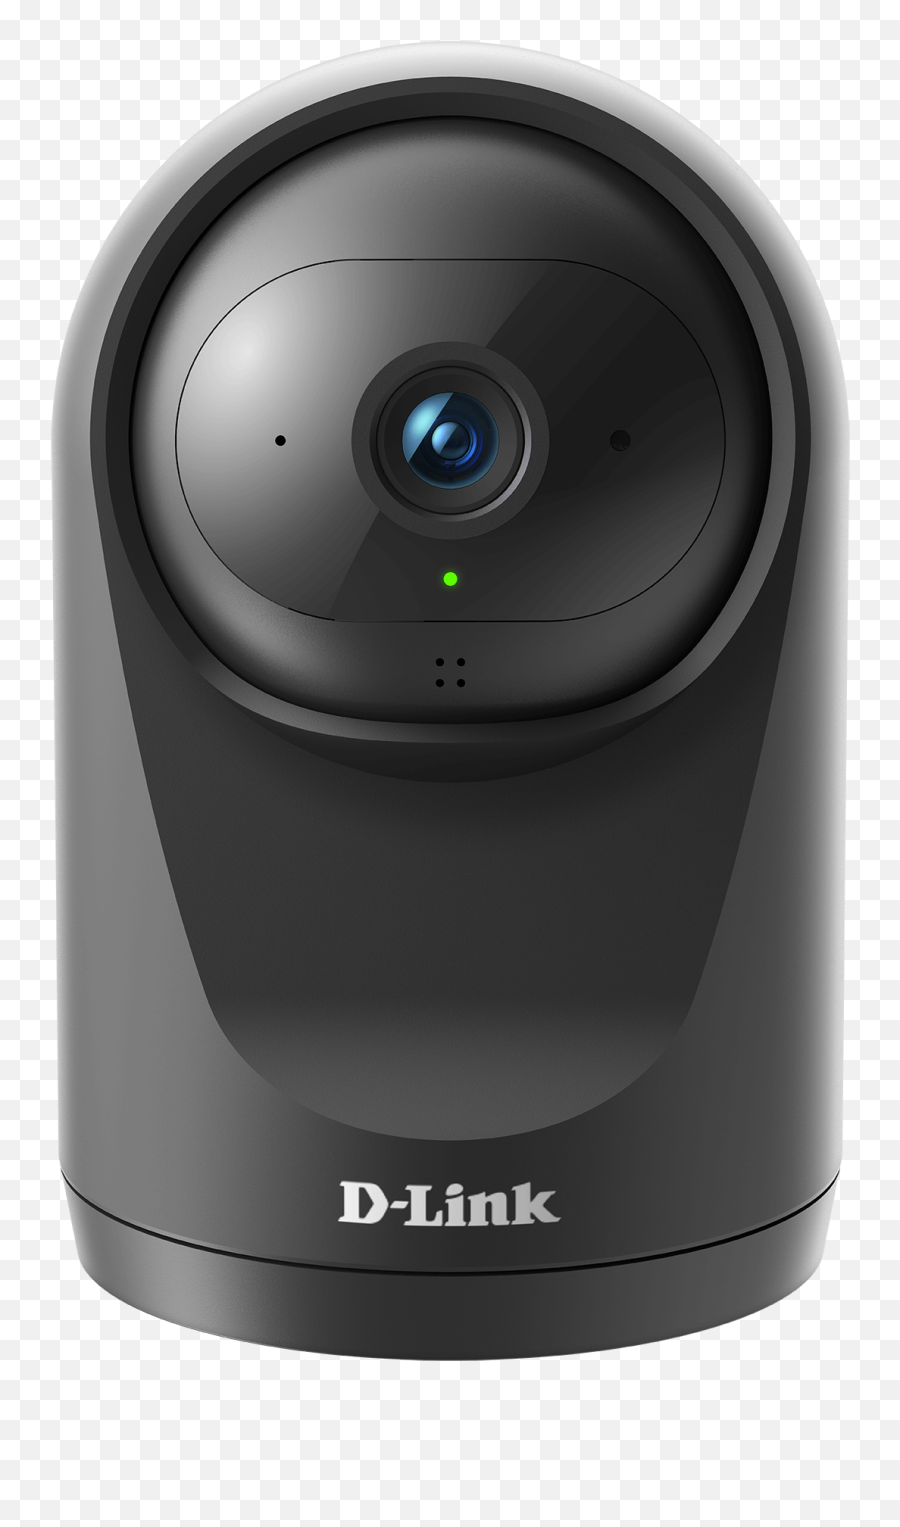 Dcs - 6500lh Compact Full Hd Pan U0026 Tilt Wifi Camera Dlink Uk Png,Tablet Icon That Looks Like A Camera Lens